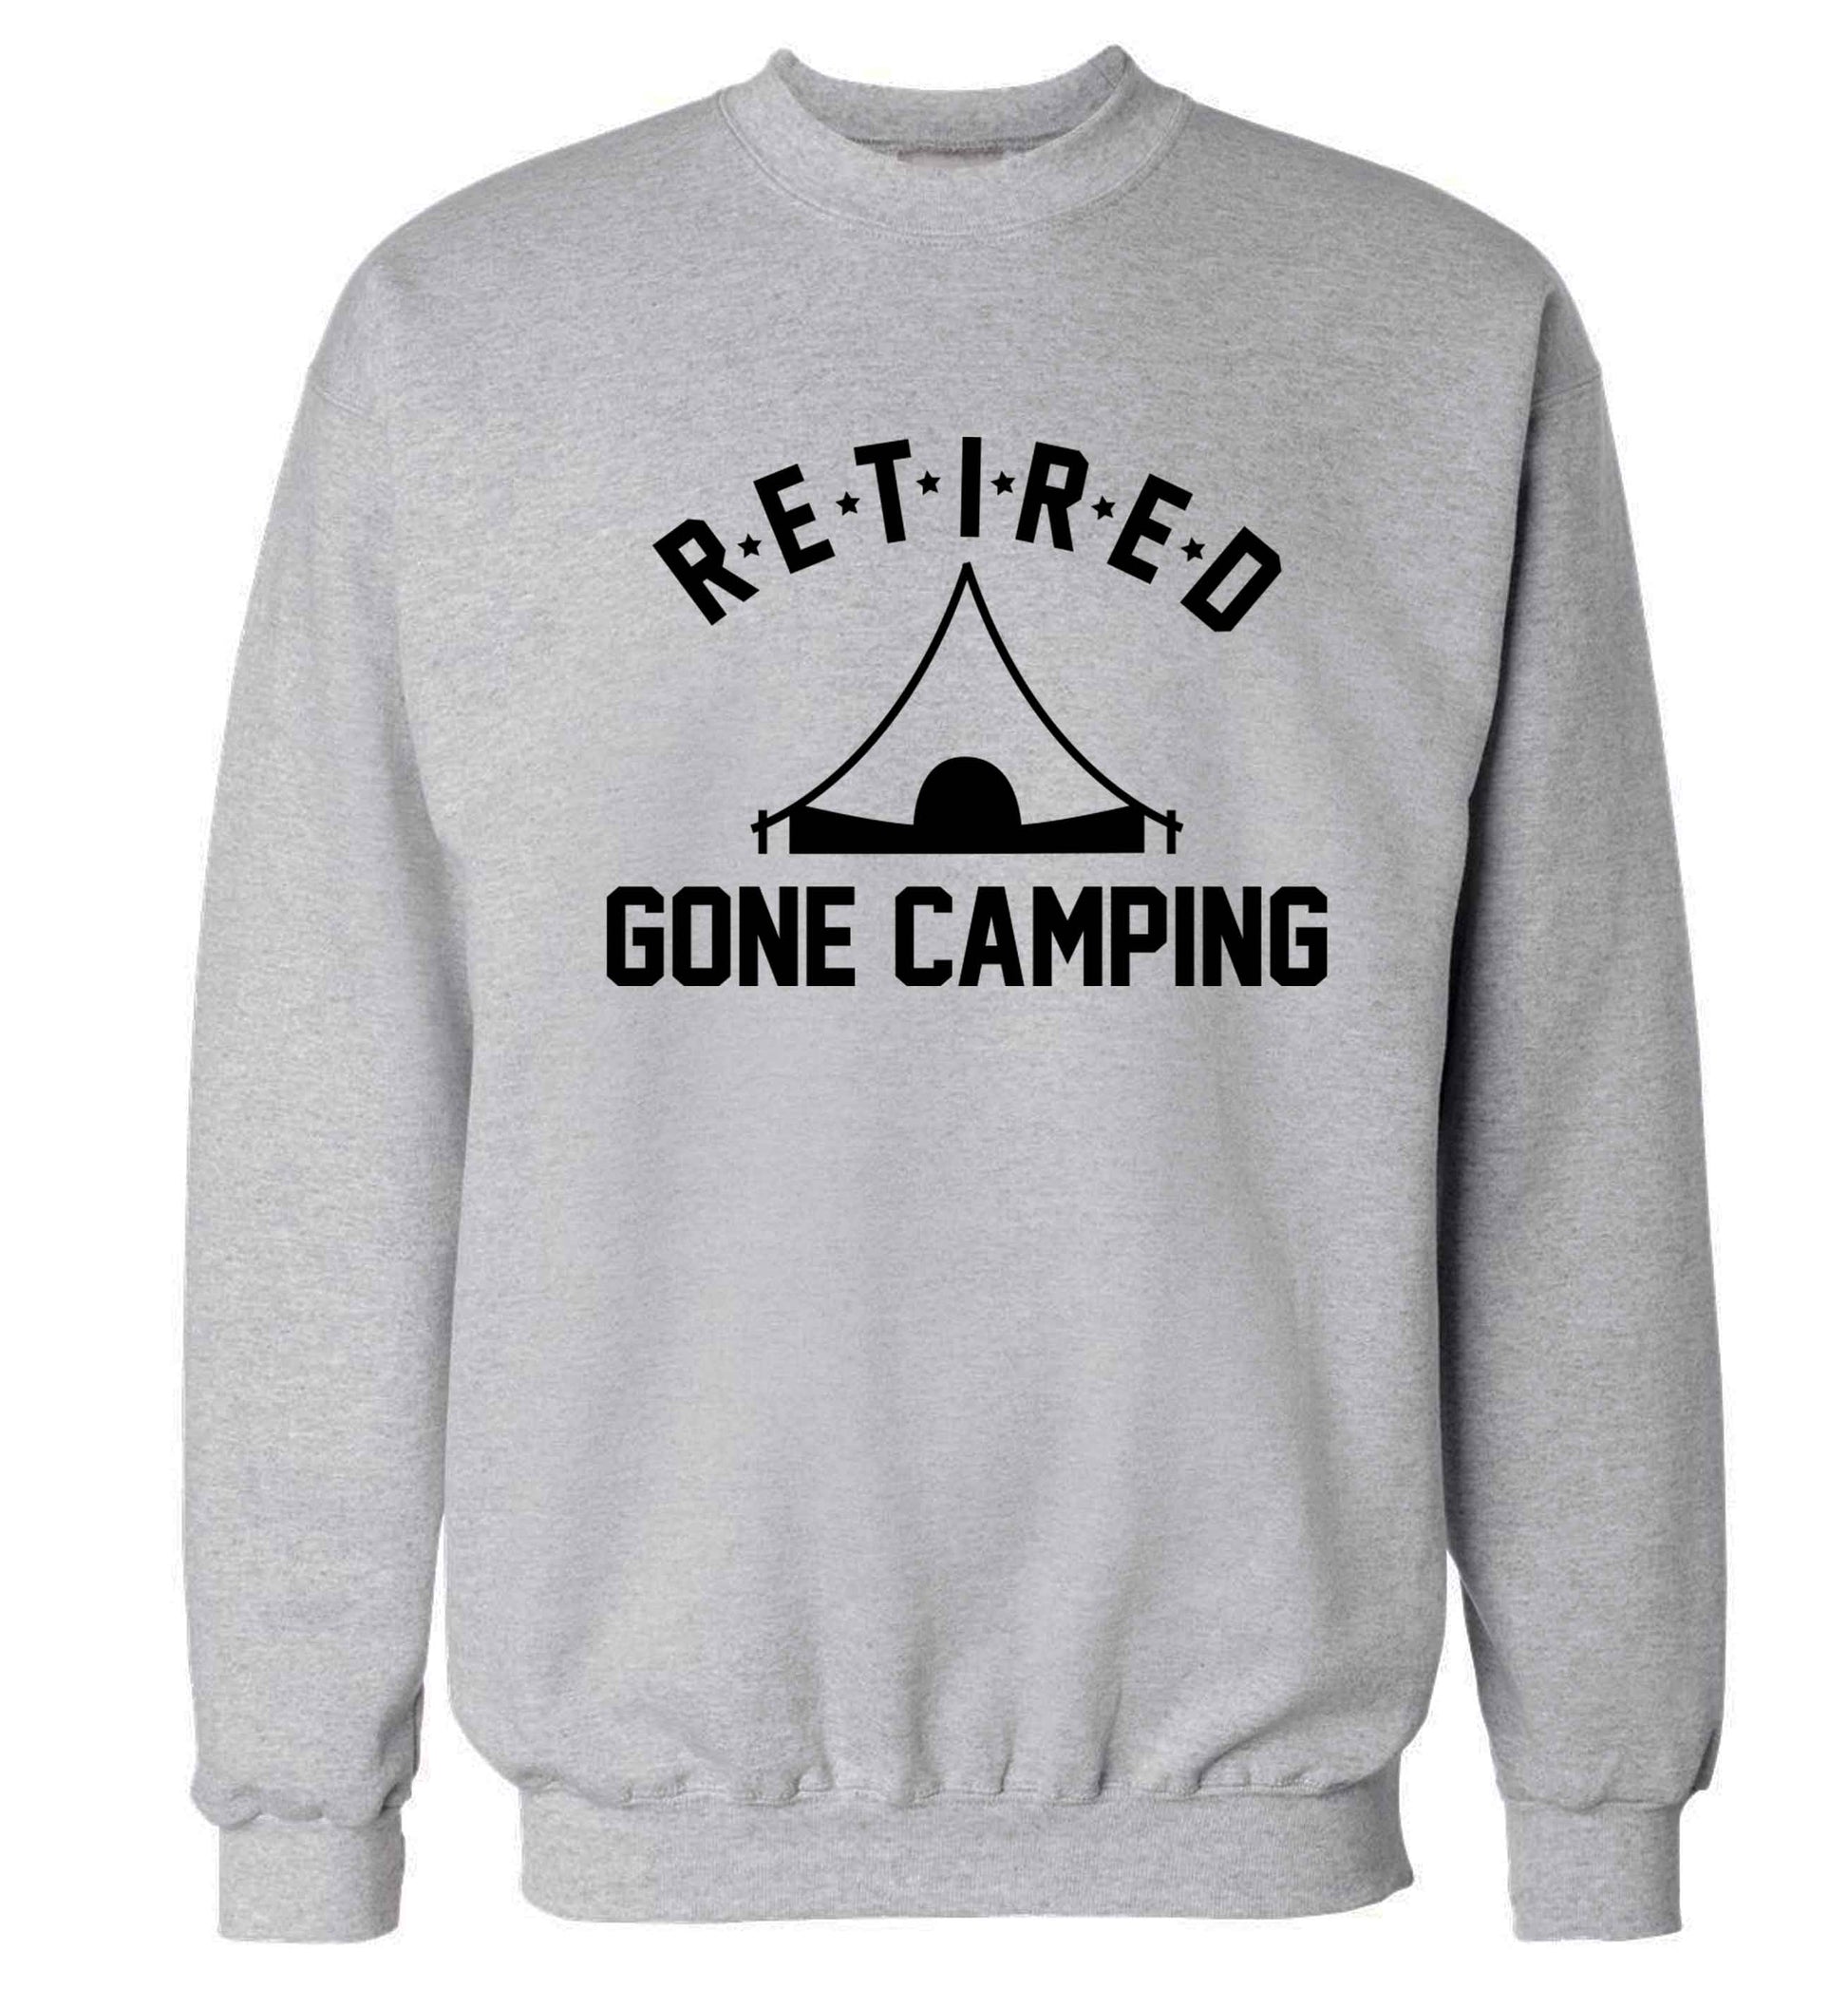 Retired gone camping Adult's unisex grey Sweater 2XL